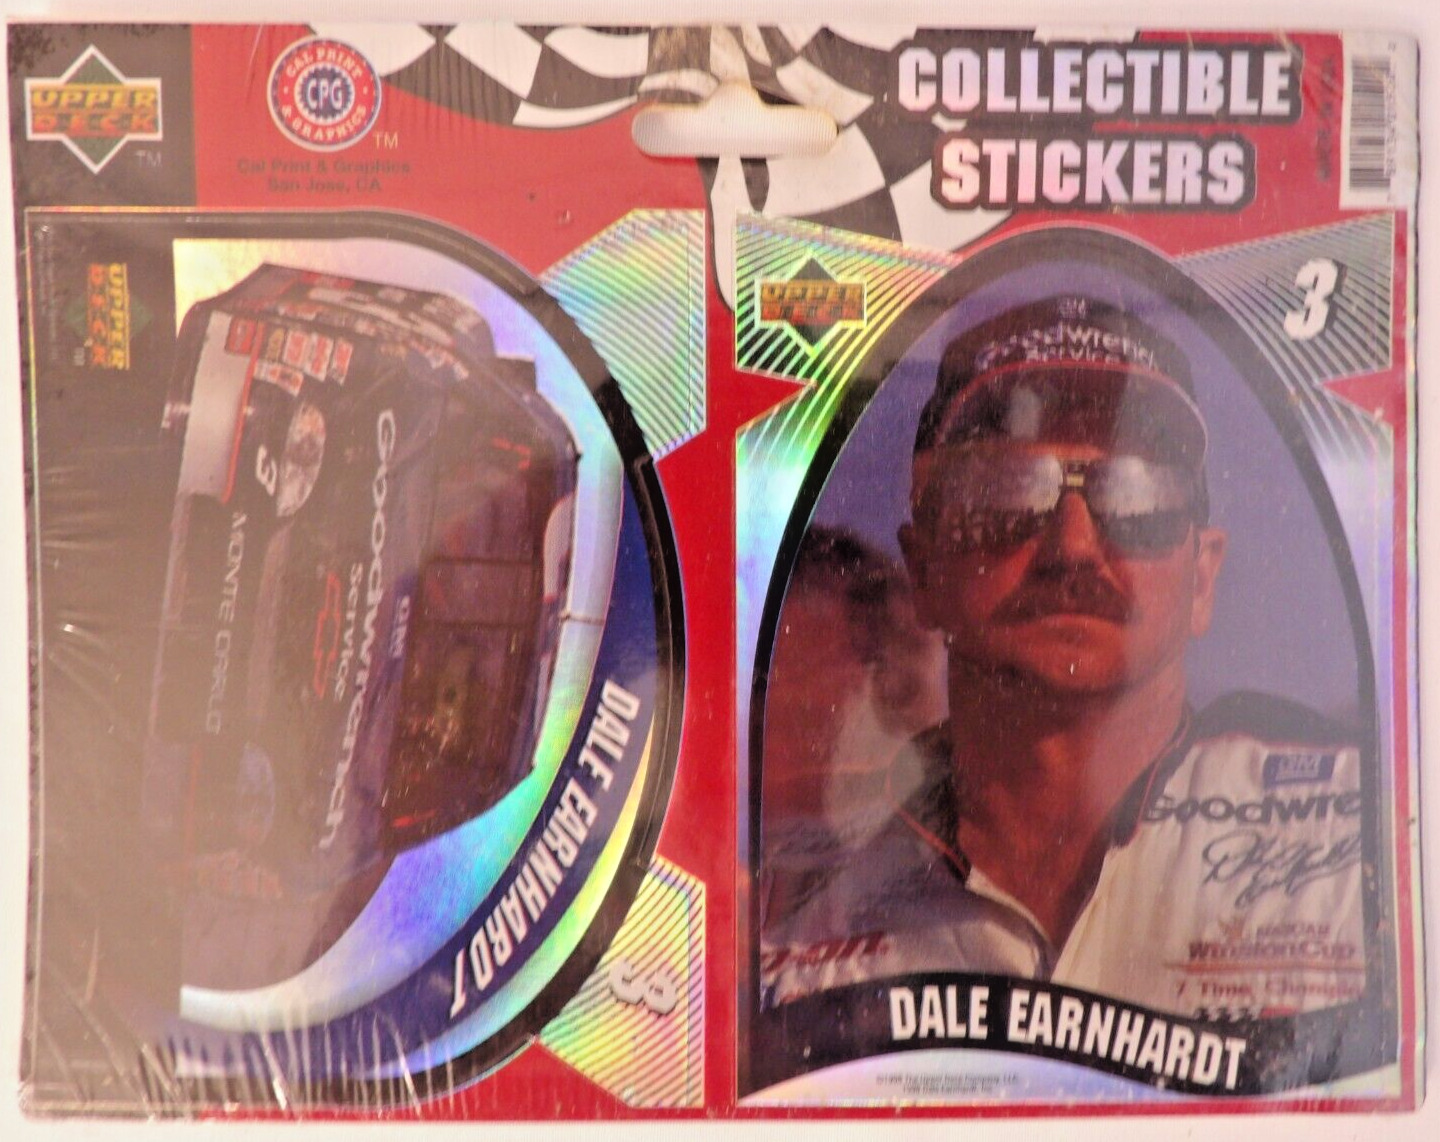 1998 UPPER DECK DALE EARNHARDT COLLECTIBLE STICKER SET SEALED CAL PRINT